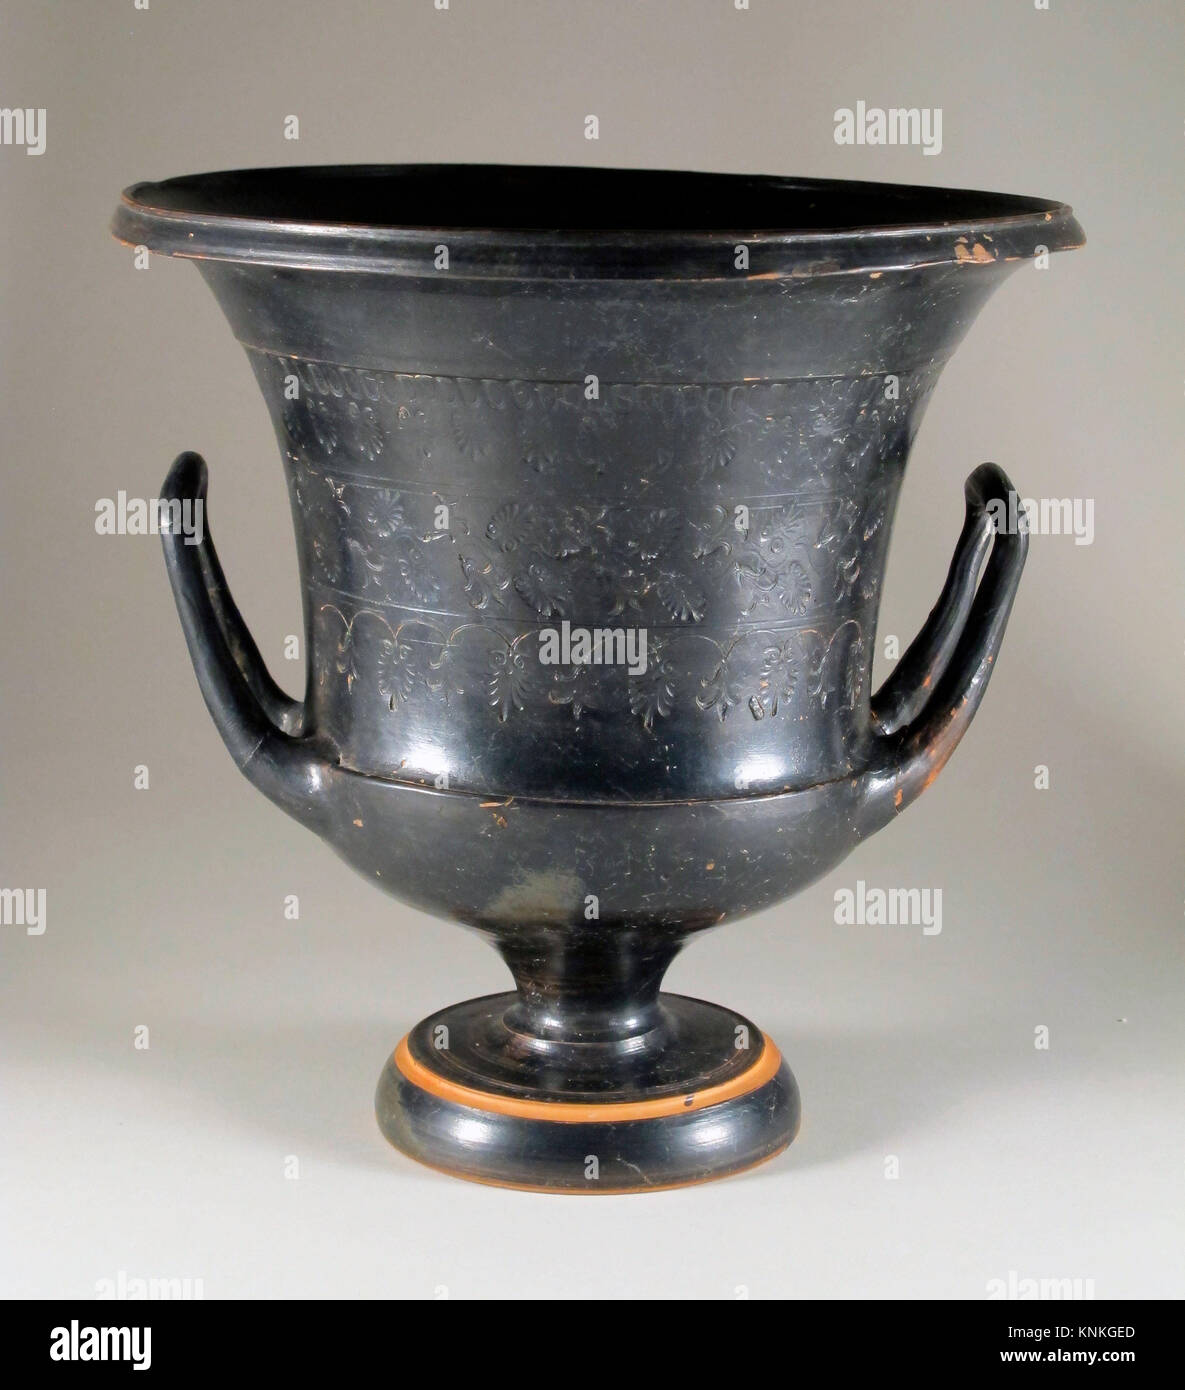 https://c8.alamy.com/comp/KNKGED/terracotta-calyx-krater-bowl-for-mixing-wine-and-water-period-classical-KNKGED.jpg